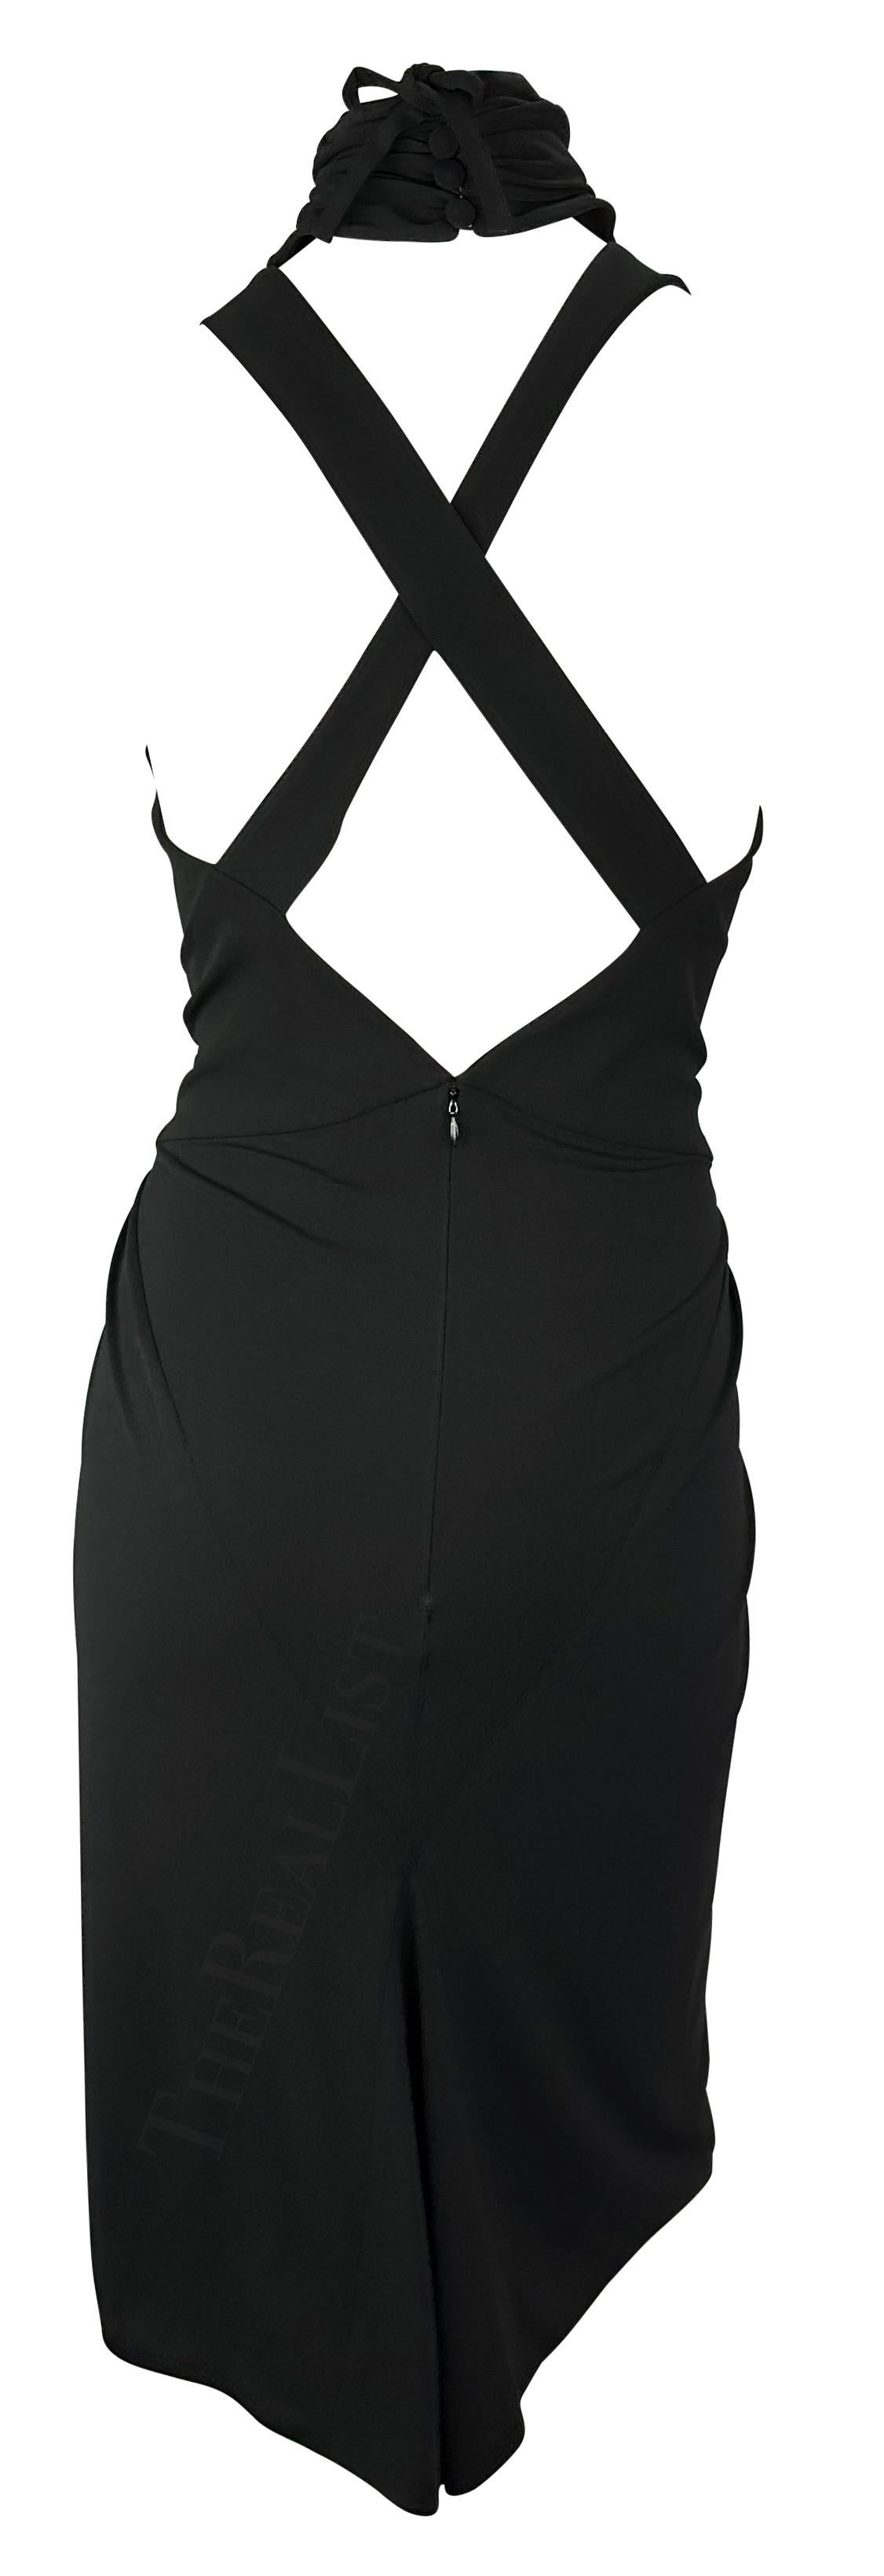 S/S 2003 Karl Lagerfeld Gallery Runway Black Backless Ruched Midi Dress For Sale 4